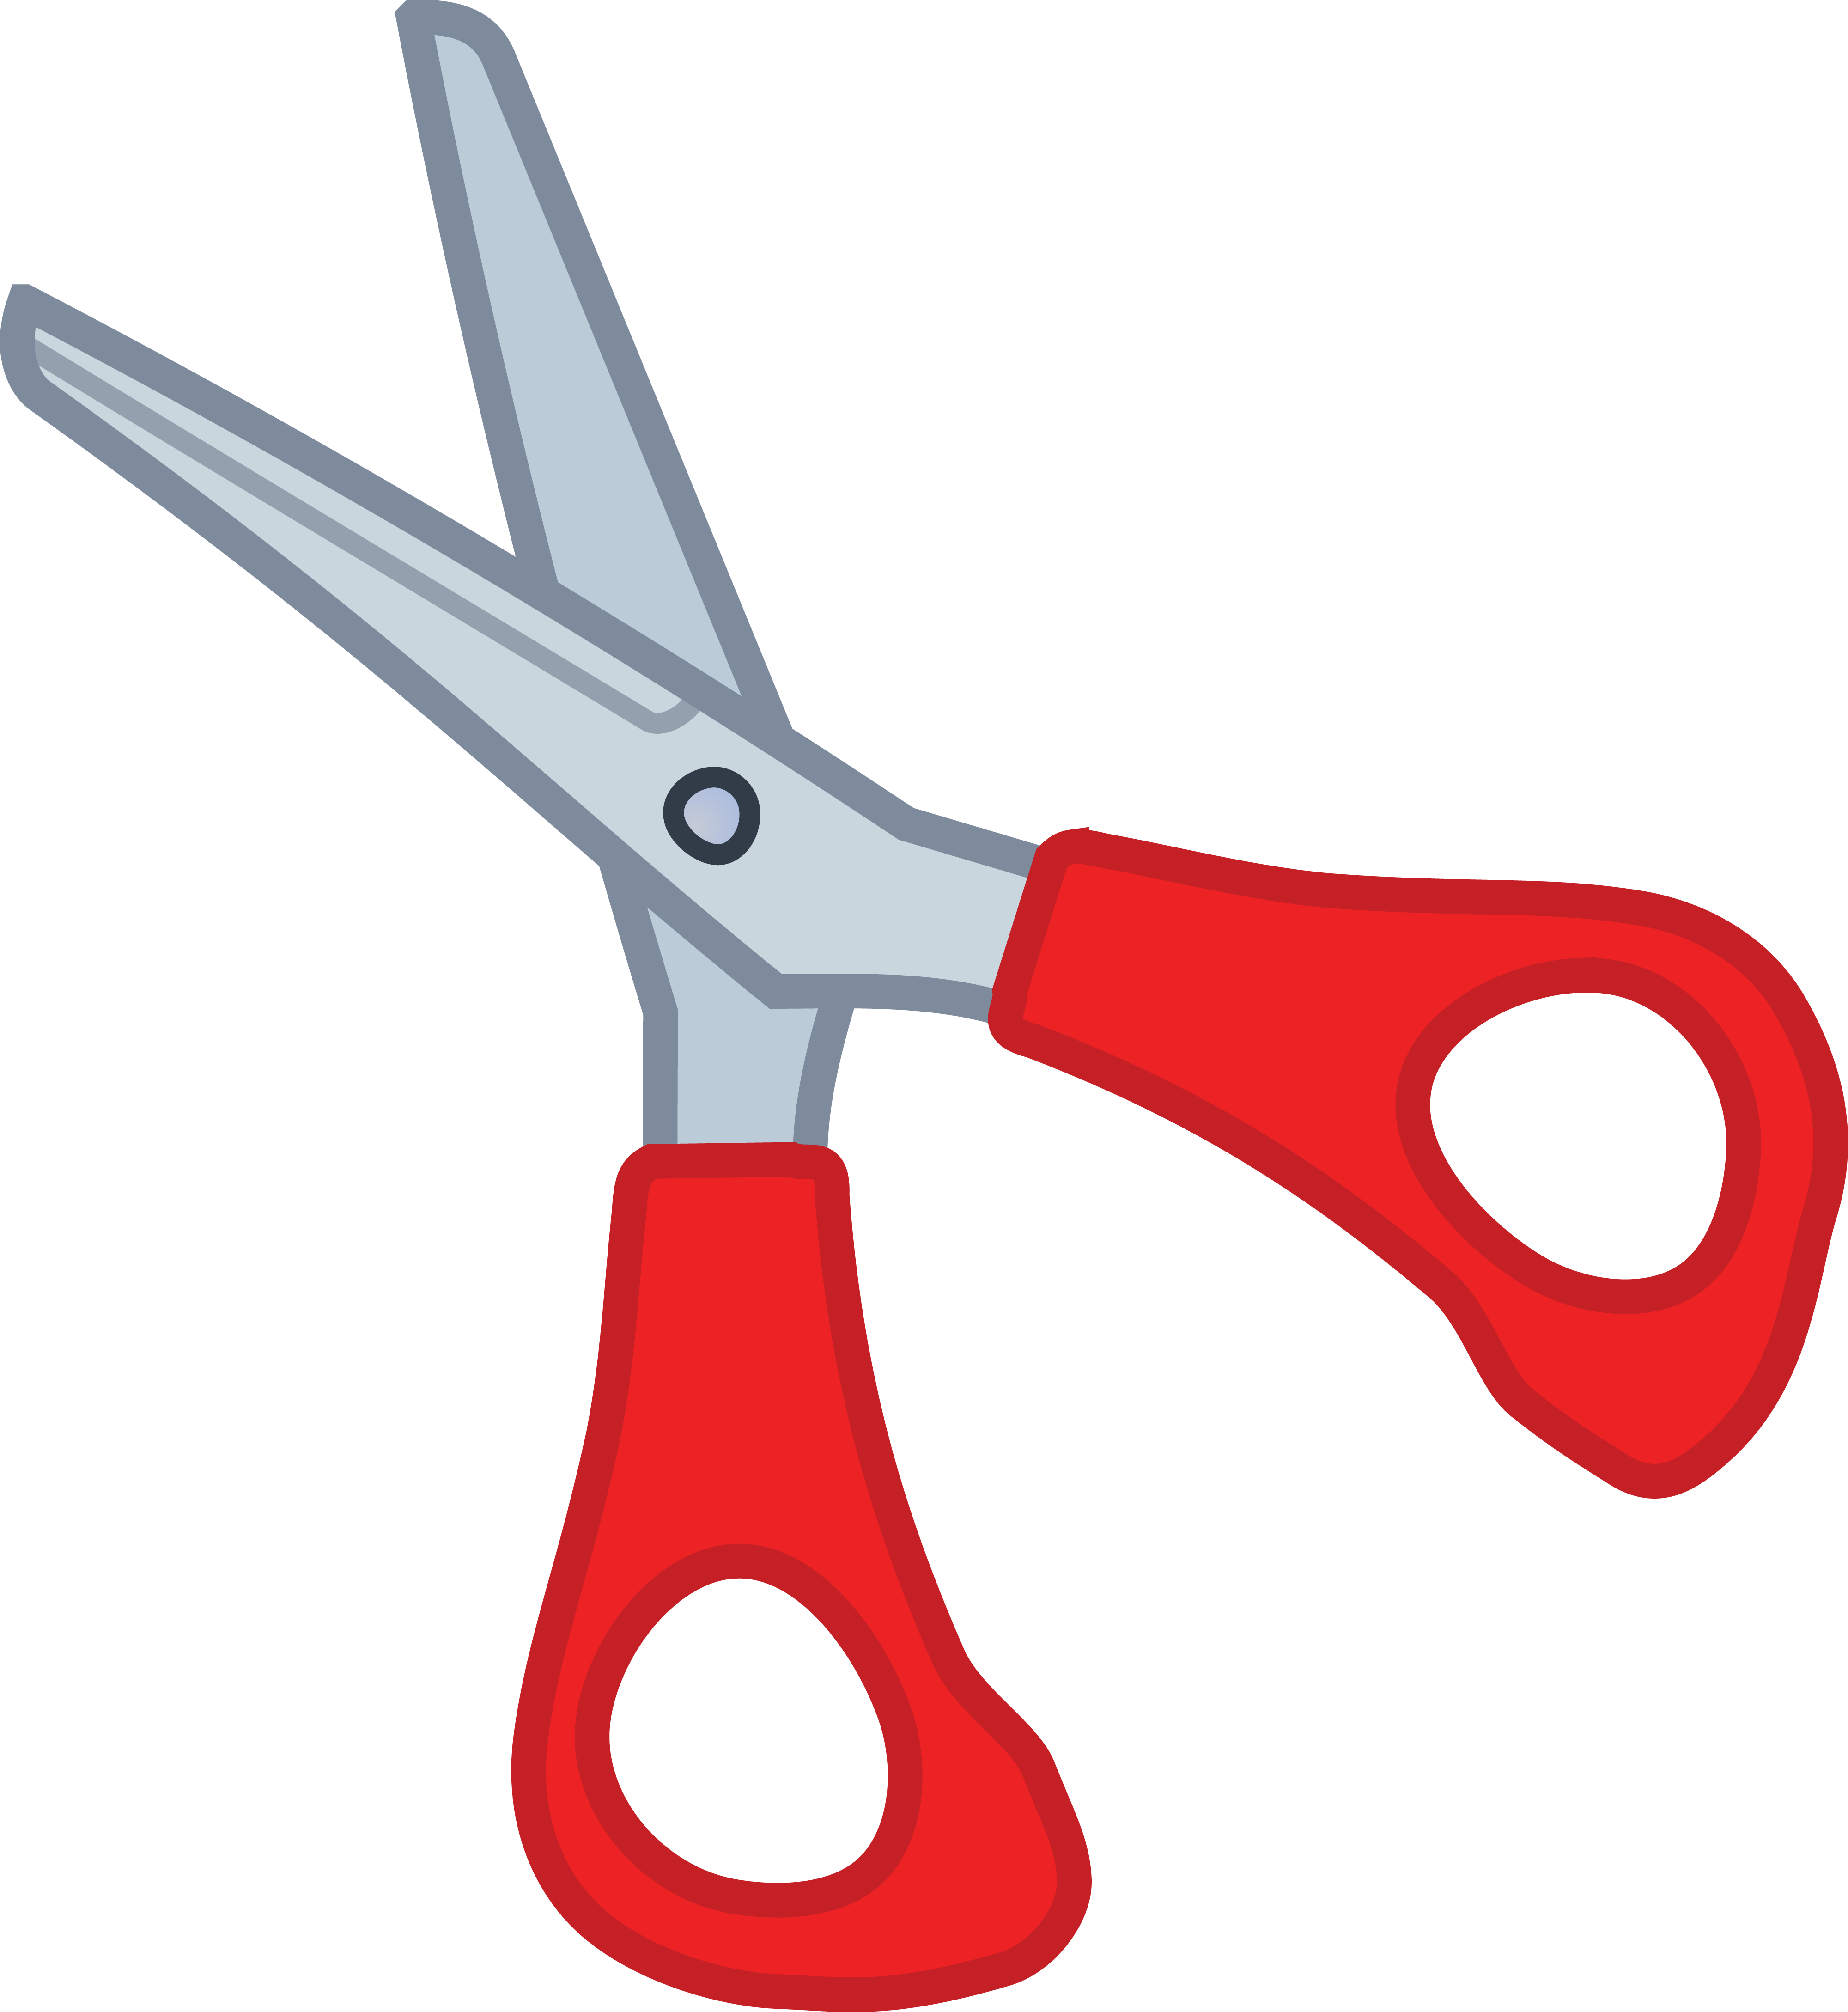 PNG Of A Pair Of Scissors - 158660